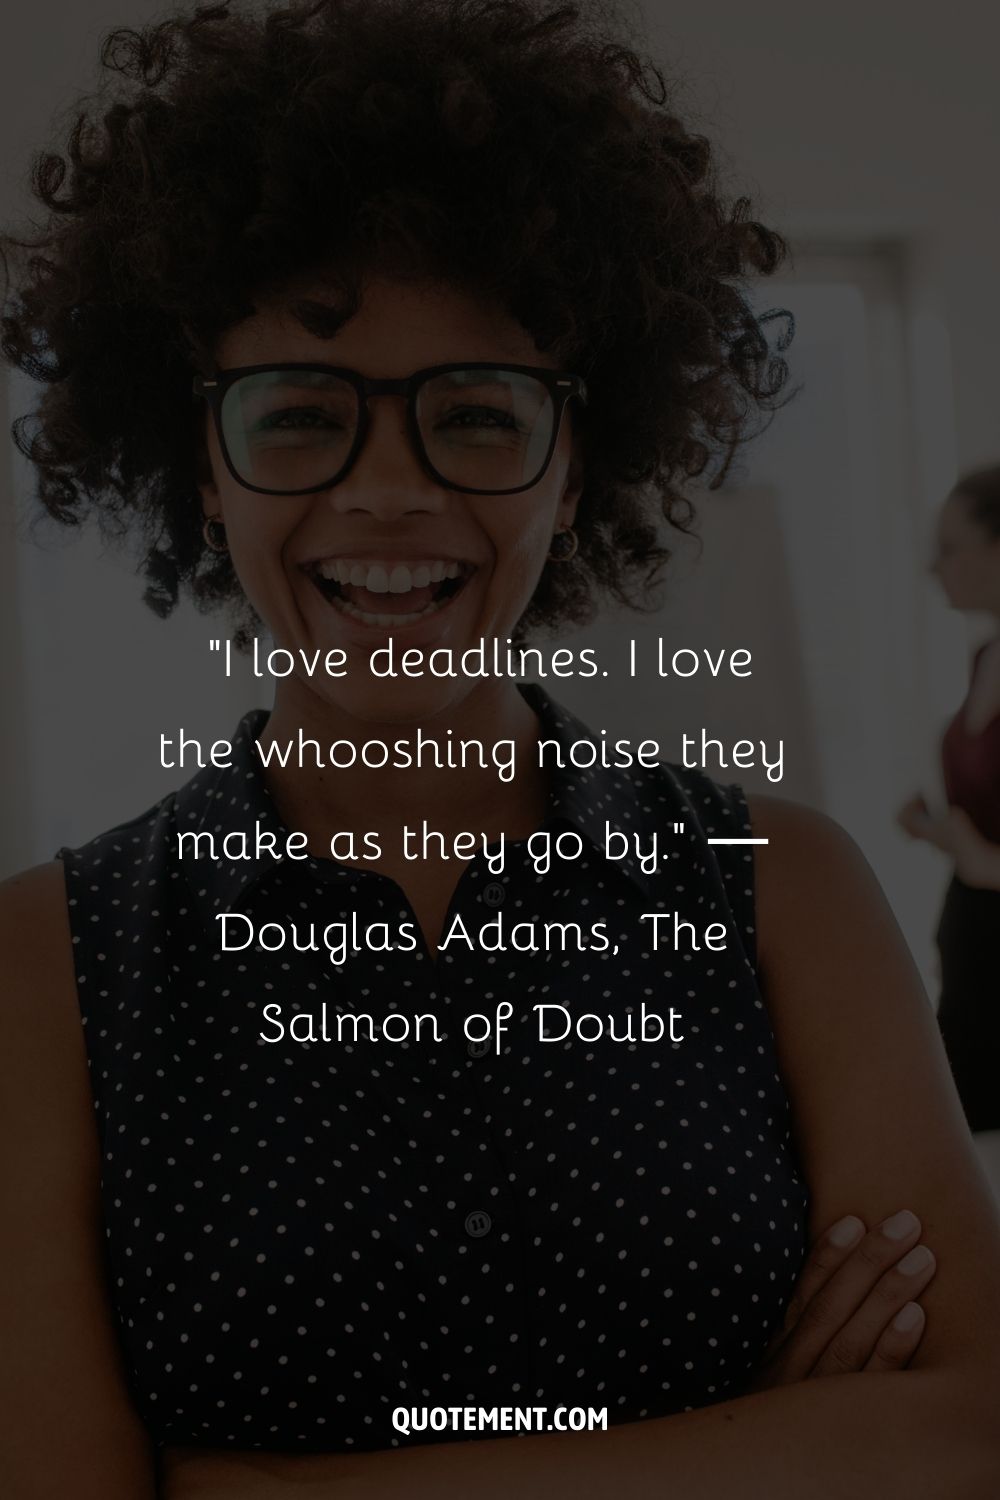 “I love deadlines. I love the whooshing noise they make as they go by.” ― Douglas Adams, The Salmon of Doubt